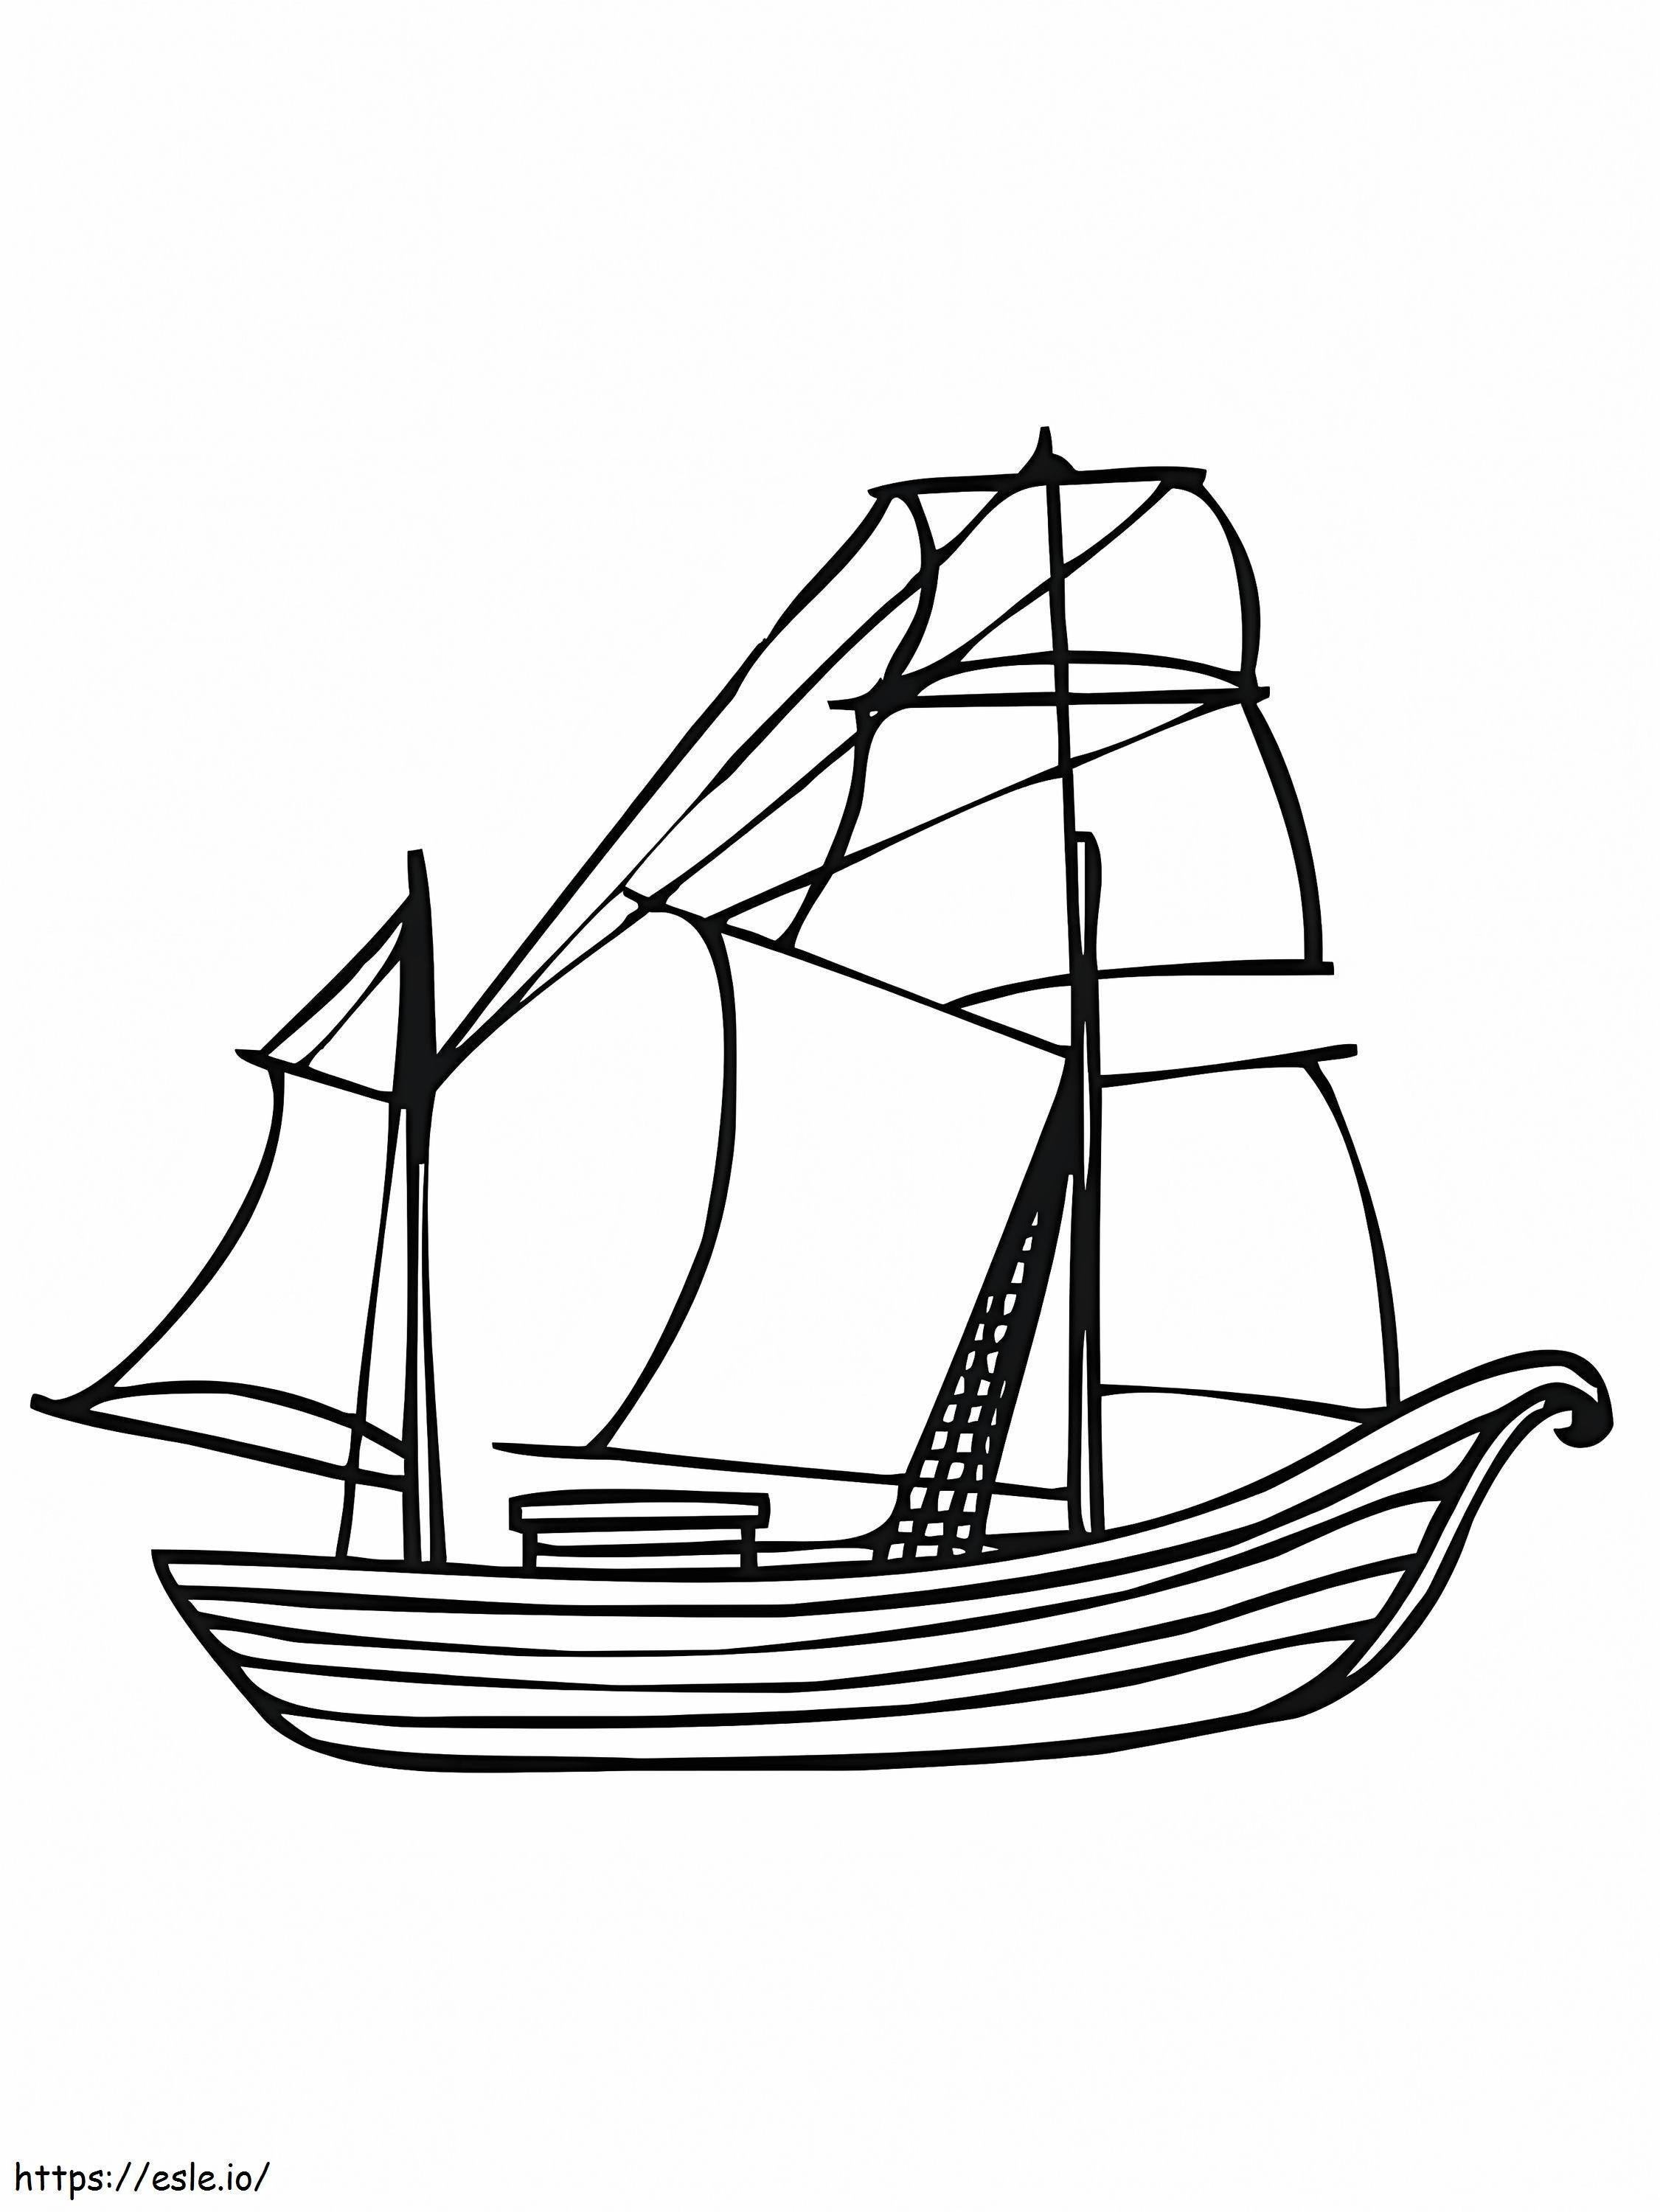 Norway Traditional Boat coloring page